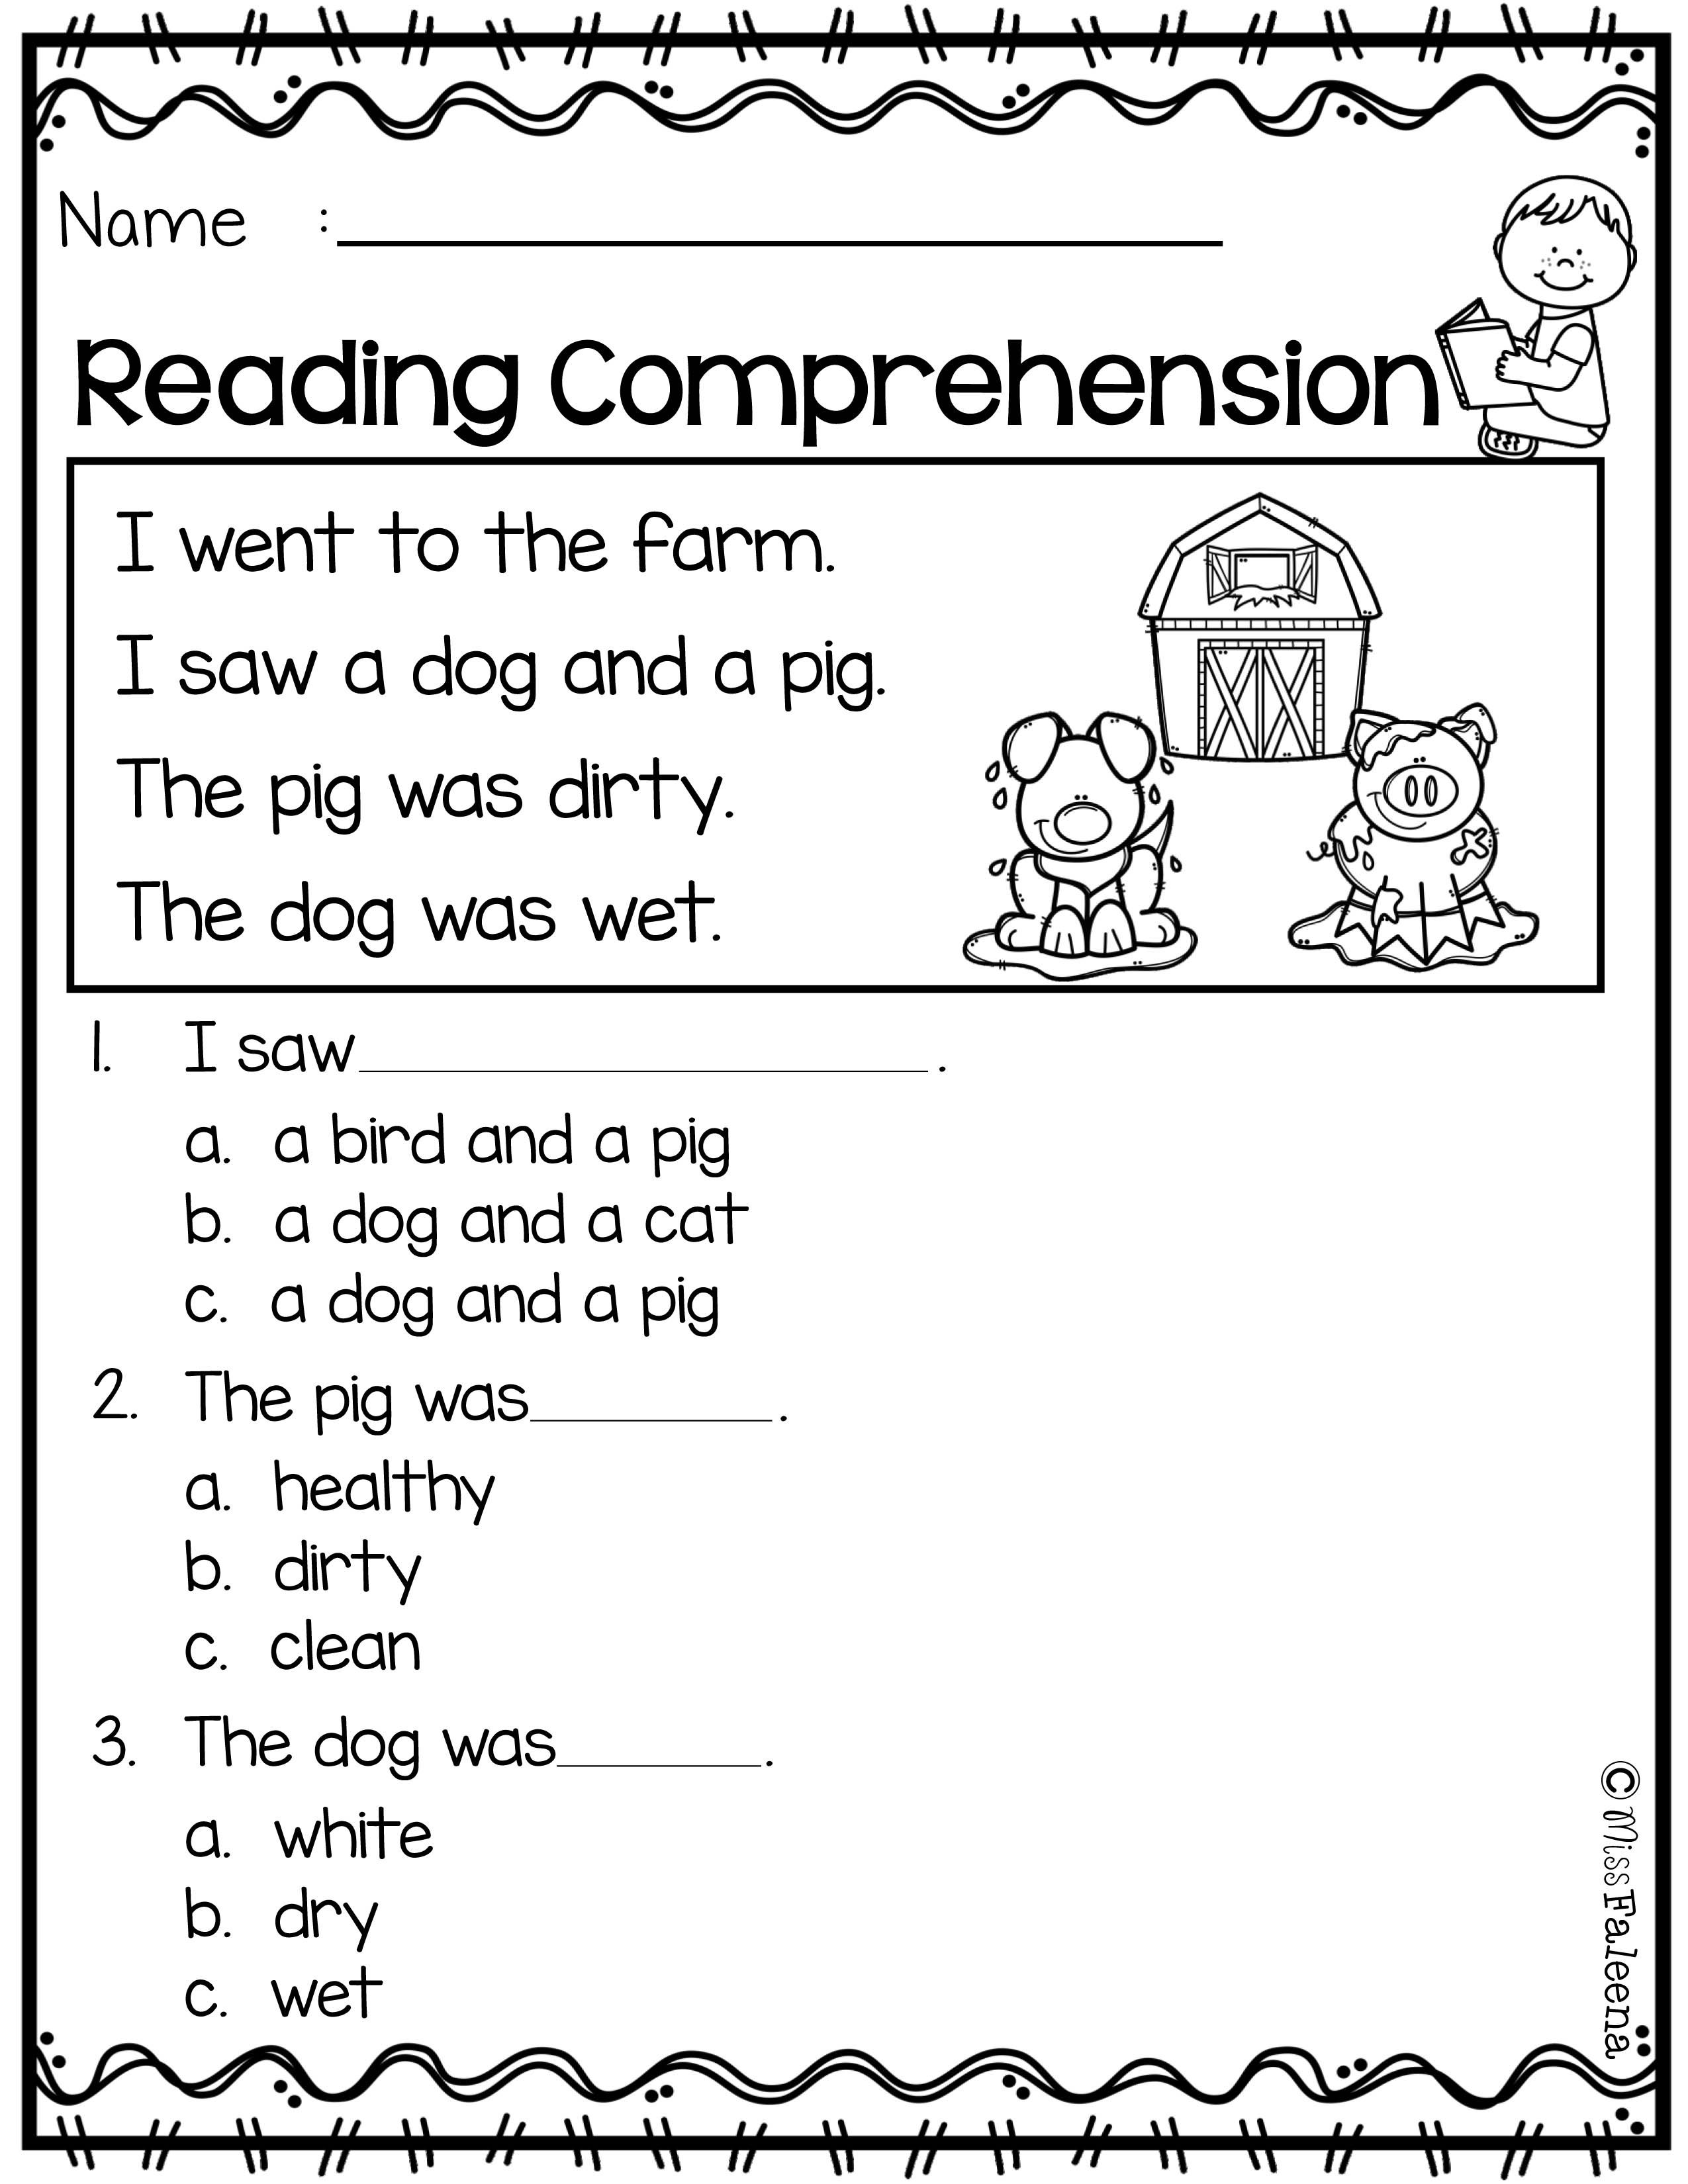 Free Reading Comprehension is suitable for Kindergarten students… 1st